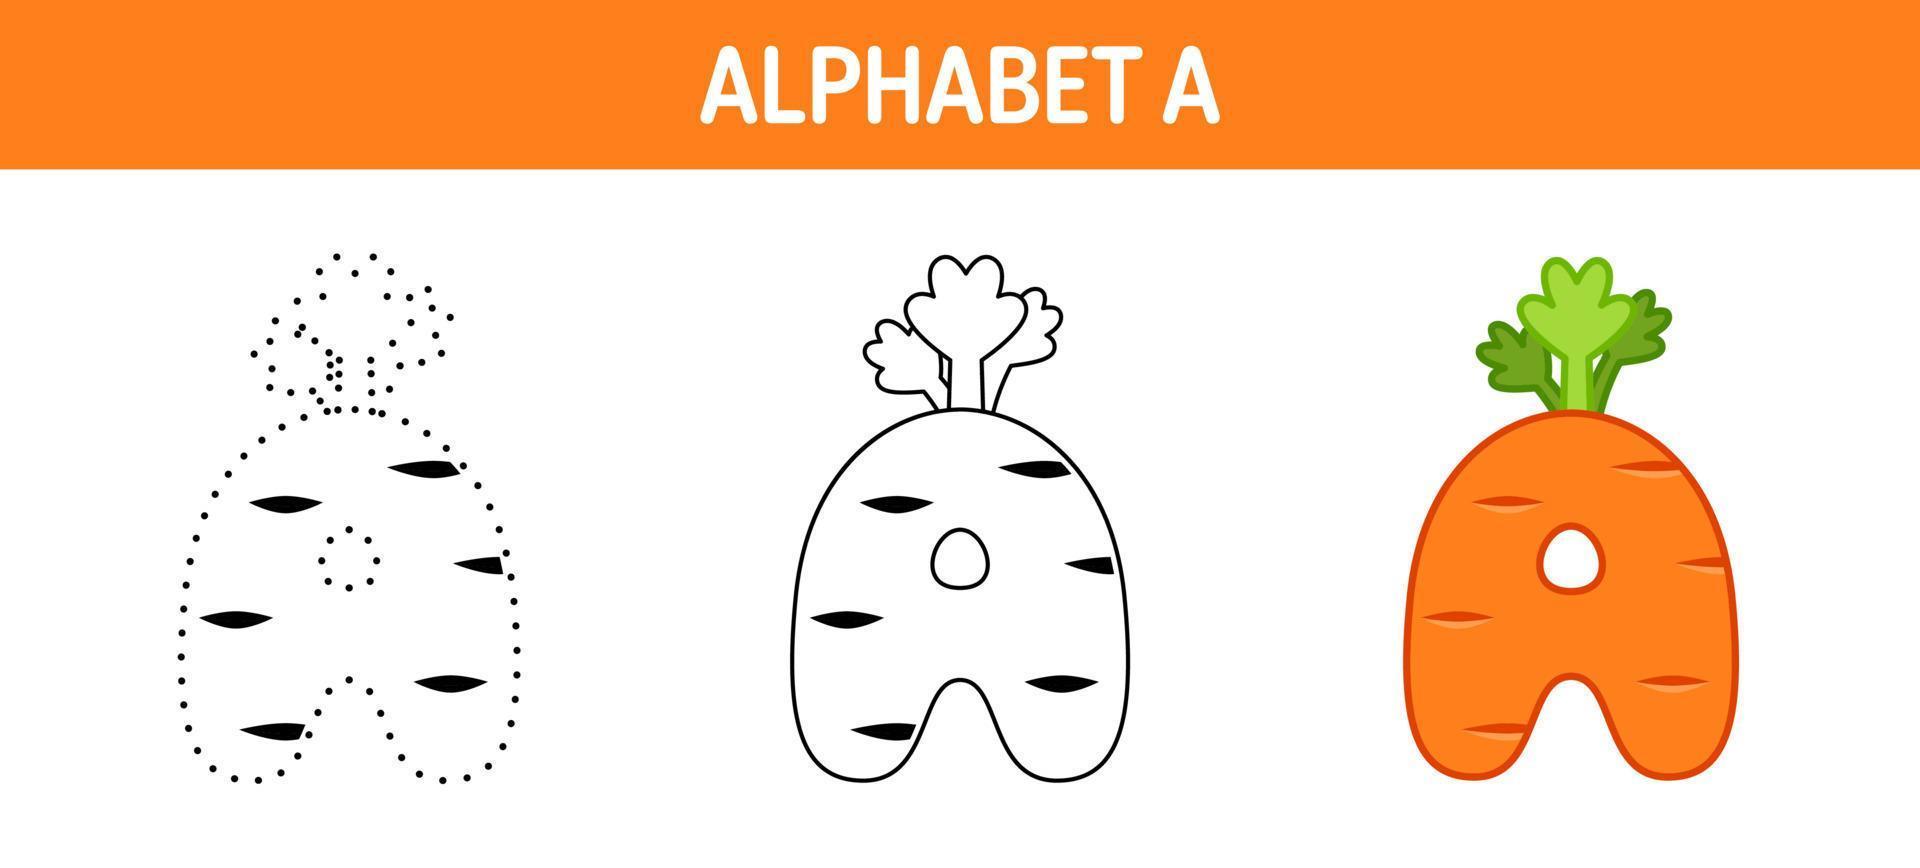 Alphabet A tracing and coloring worksheet for kids vector